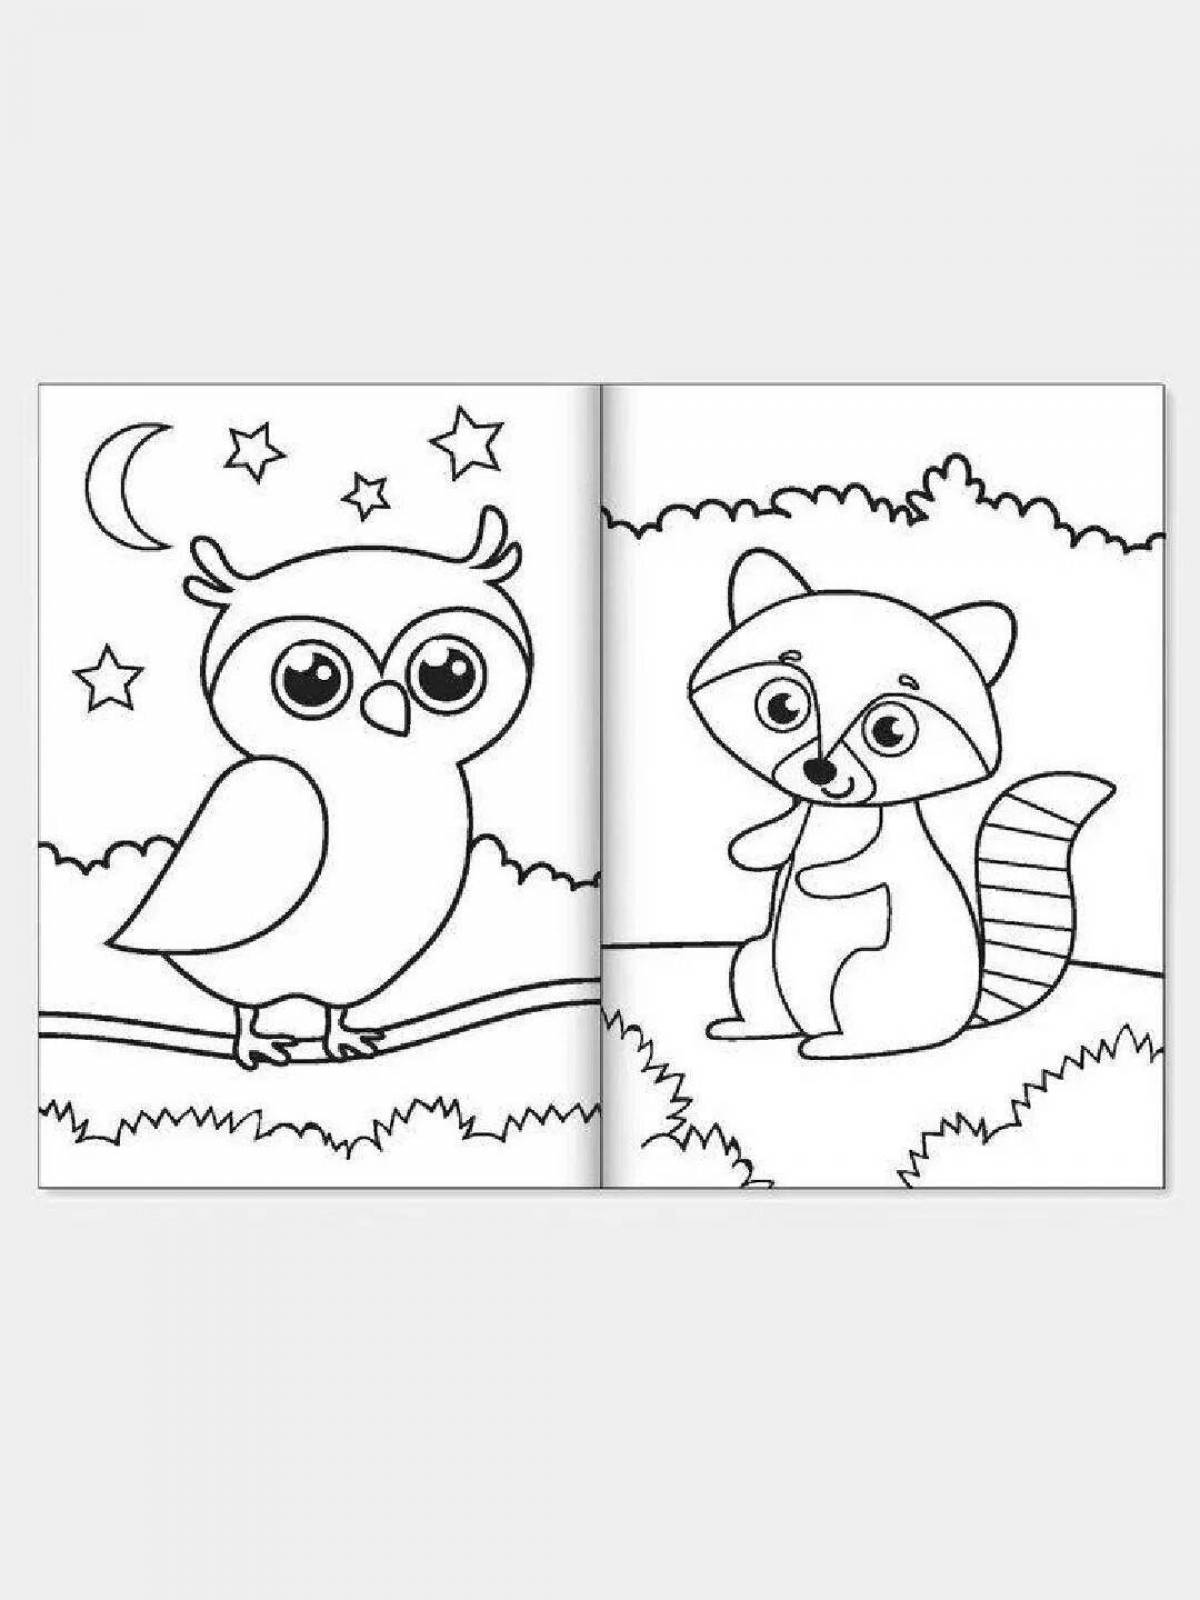 Joyful coloring full page for kids